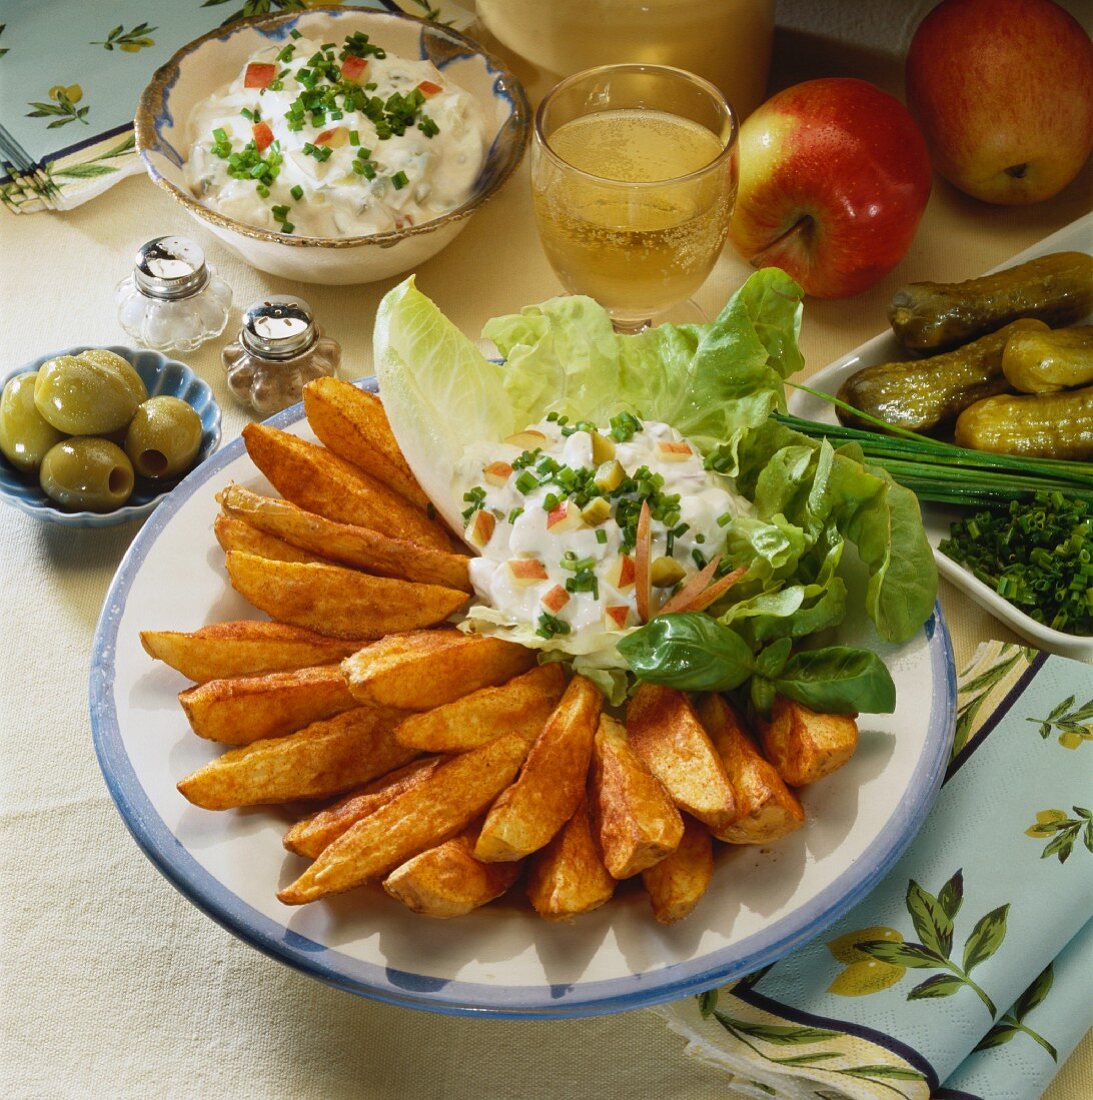 Western potatoes (Spicy potato wedges with dip)